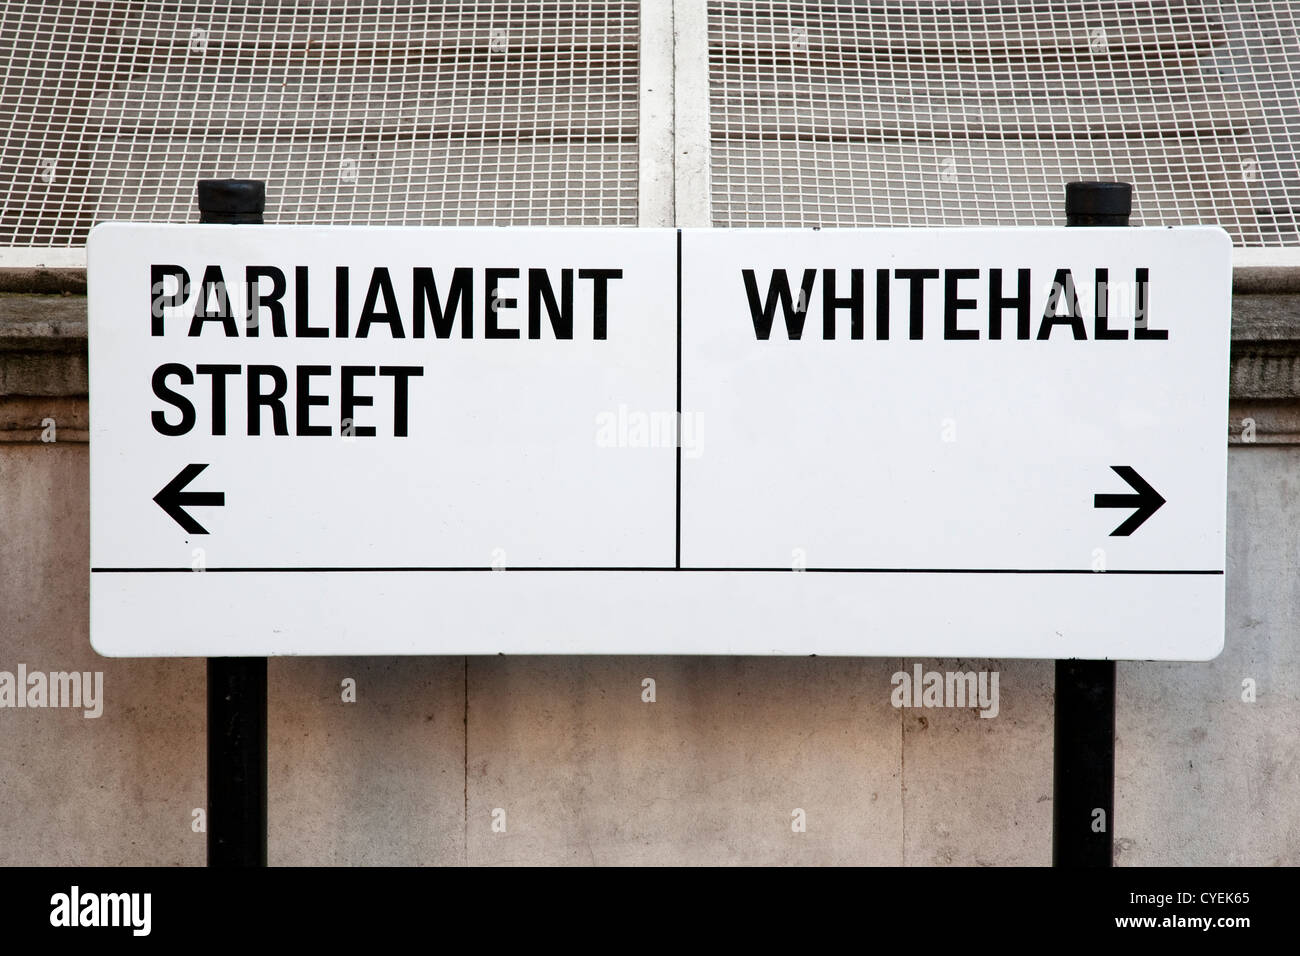 Parliament Street and Whitehall Street Sign, London, UK Stock Photo